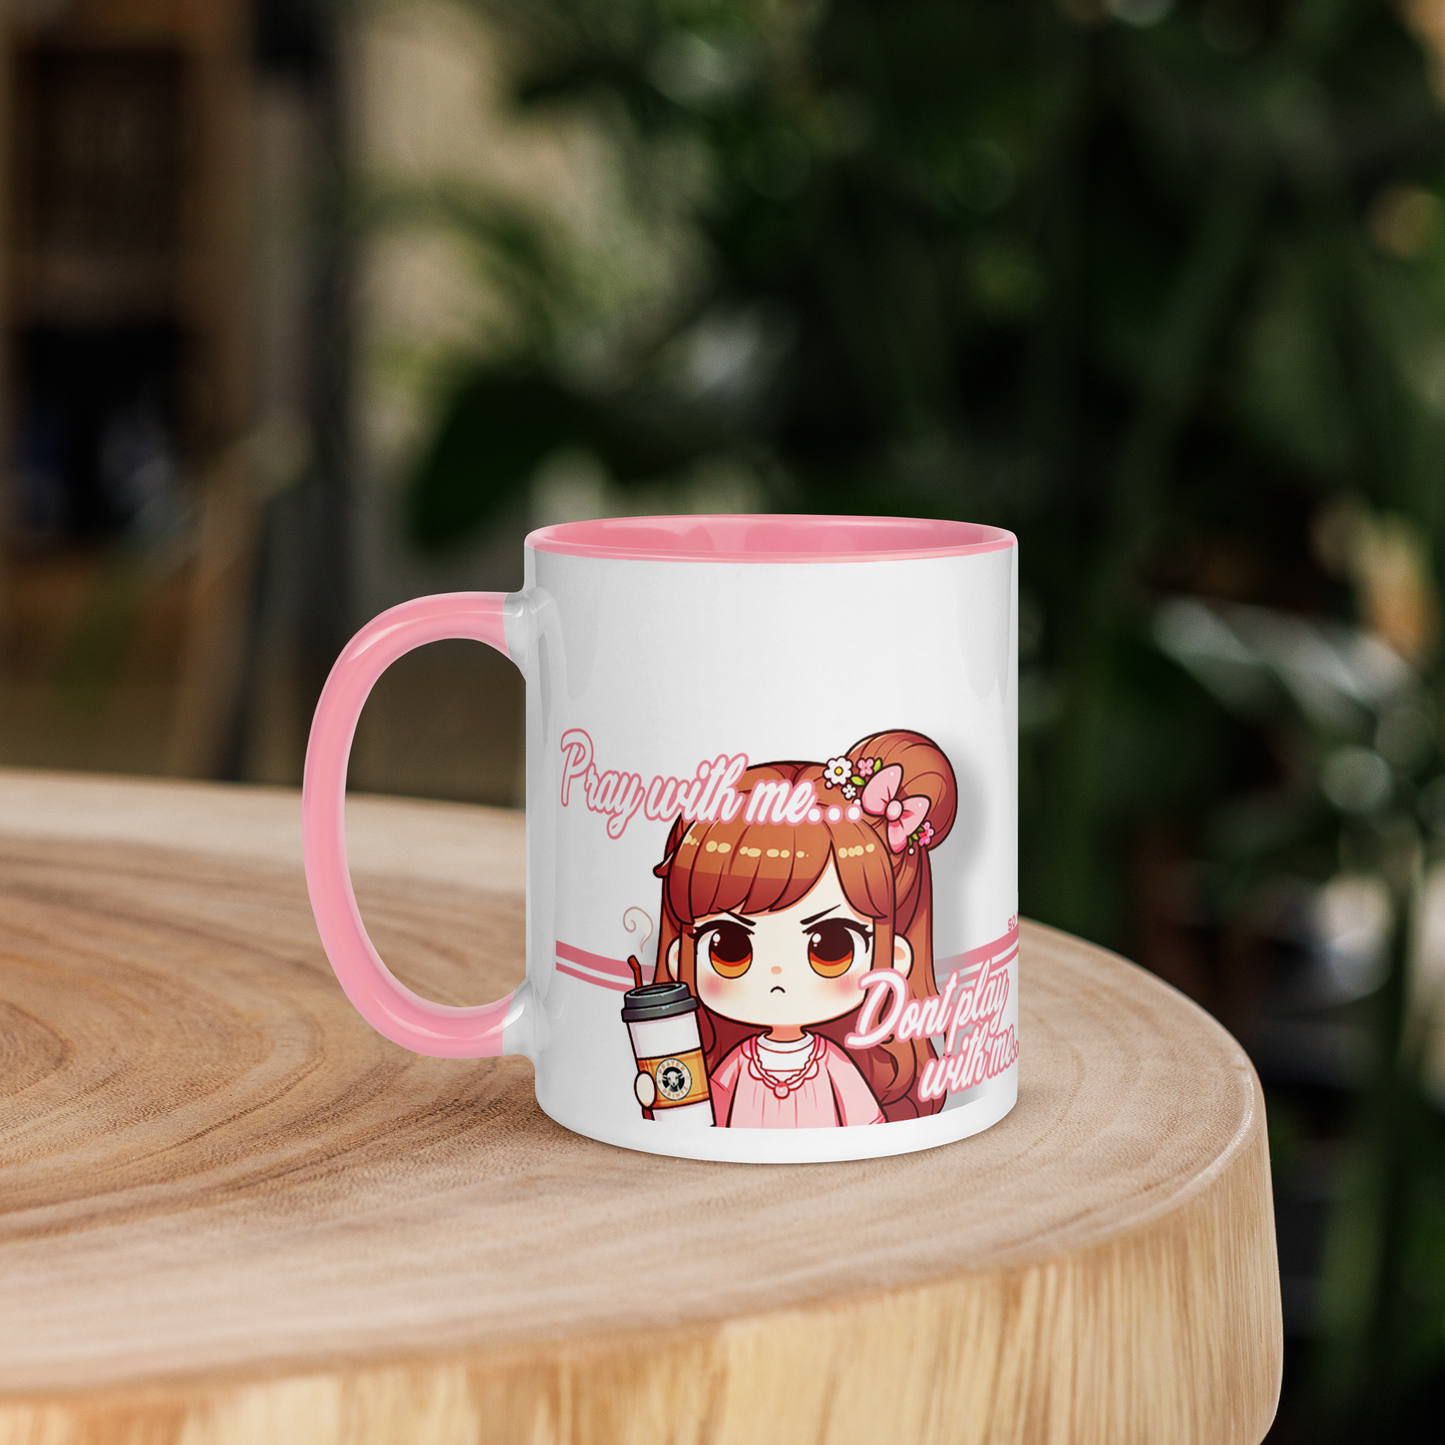 Little Amy Accent Mug by Raul Anthony Monge, Pray with me... don't play with me...